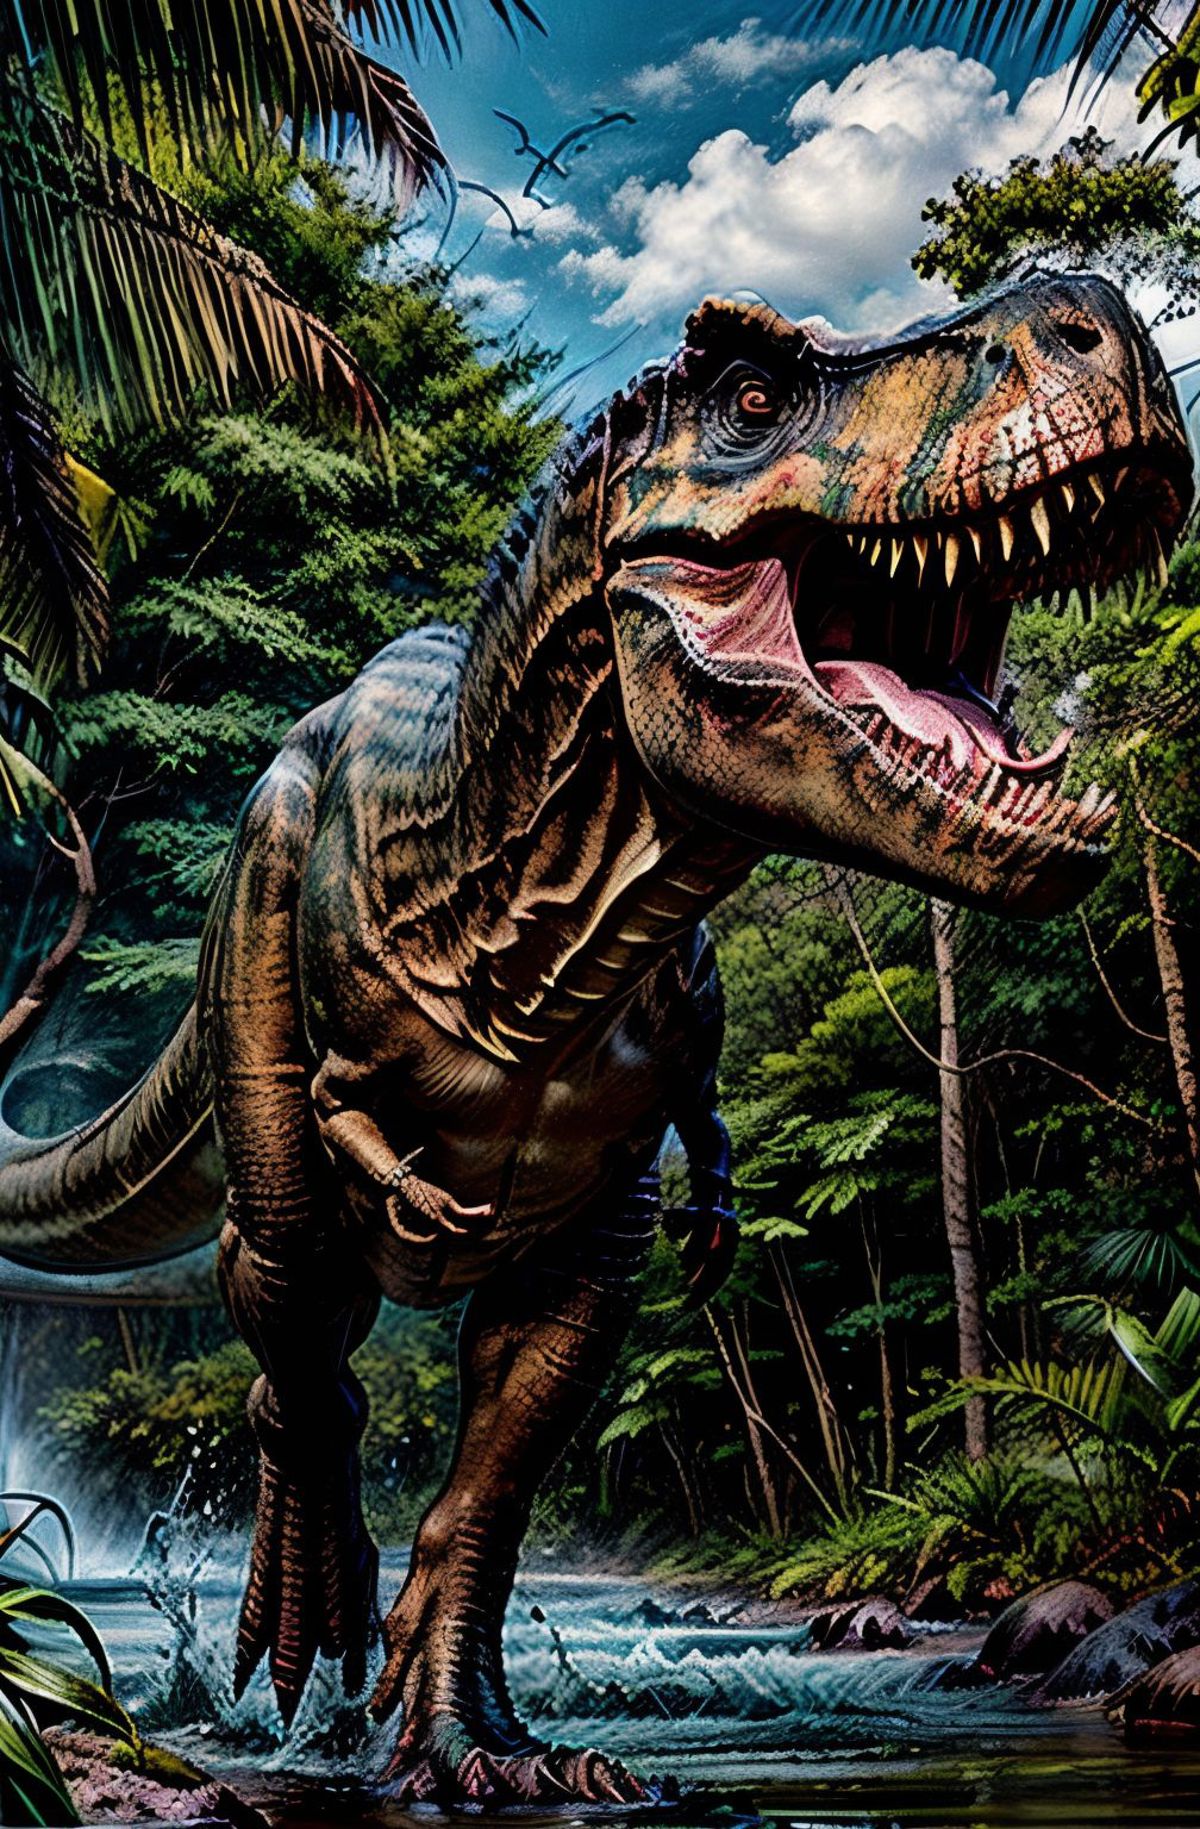 A T-Rex with open mouth in a jungle setting.